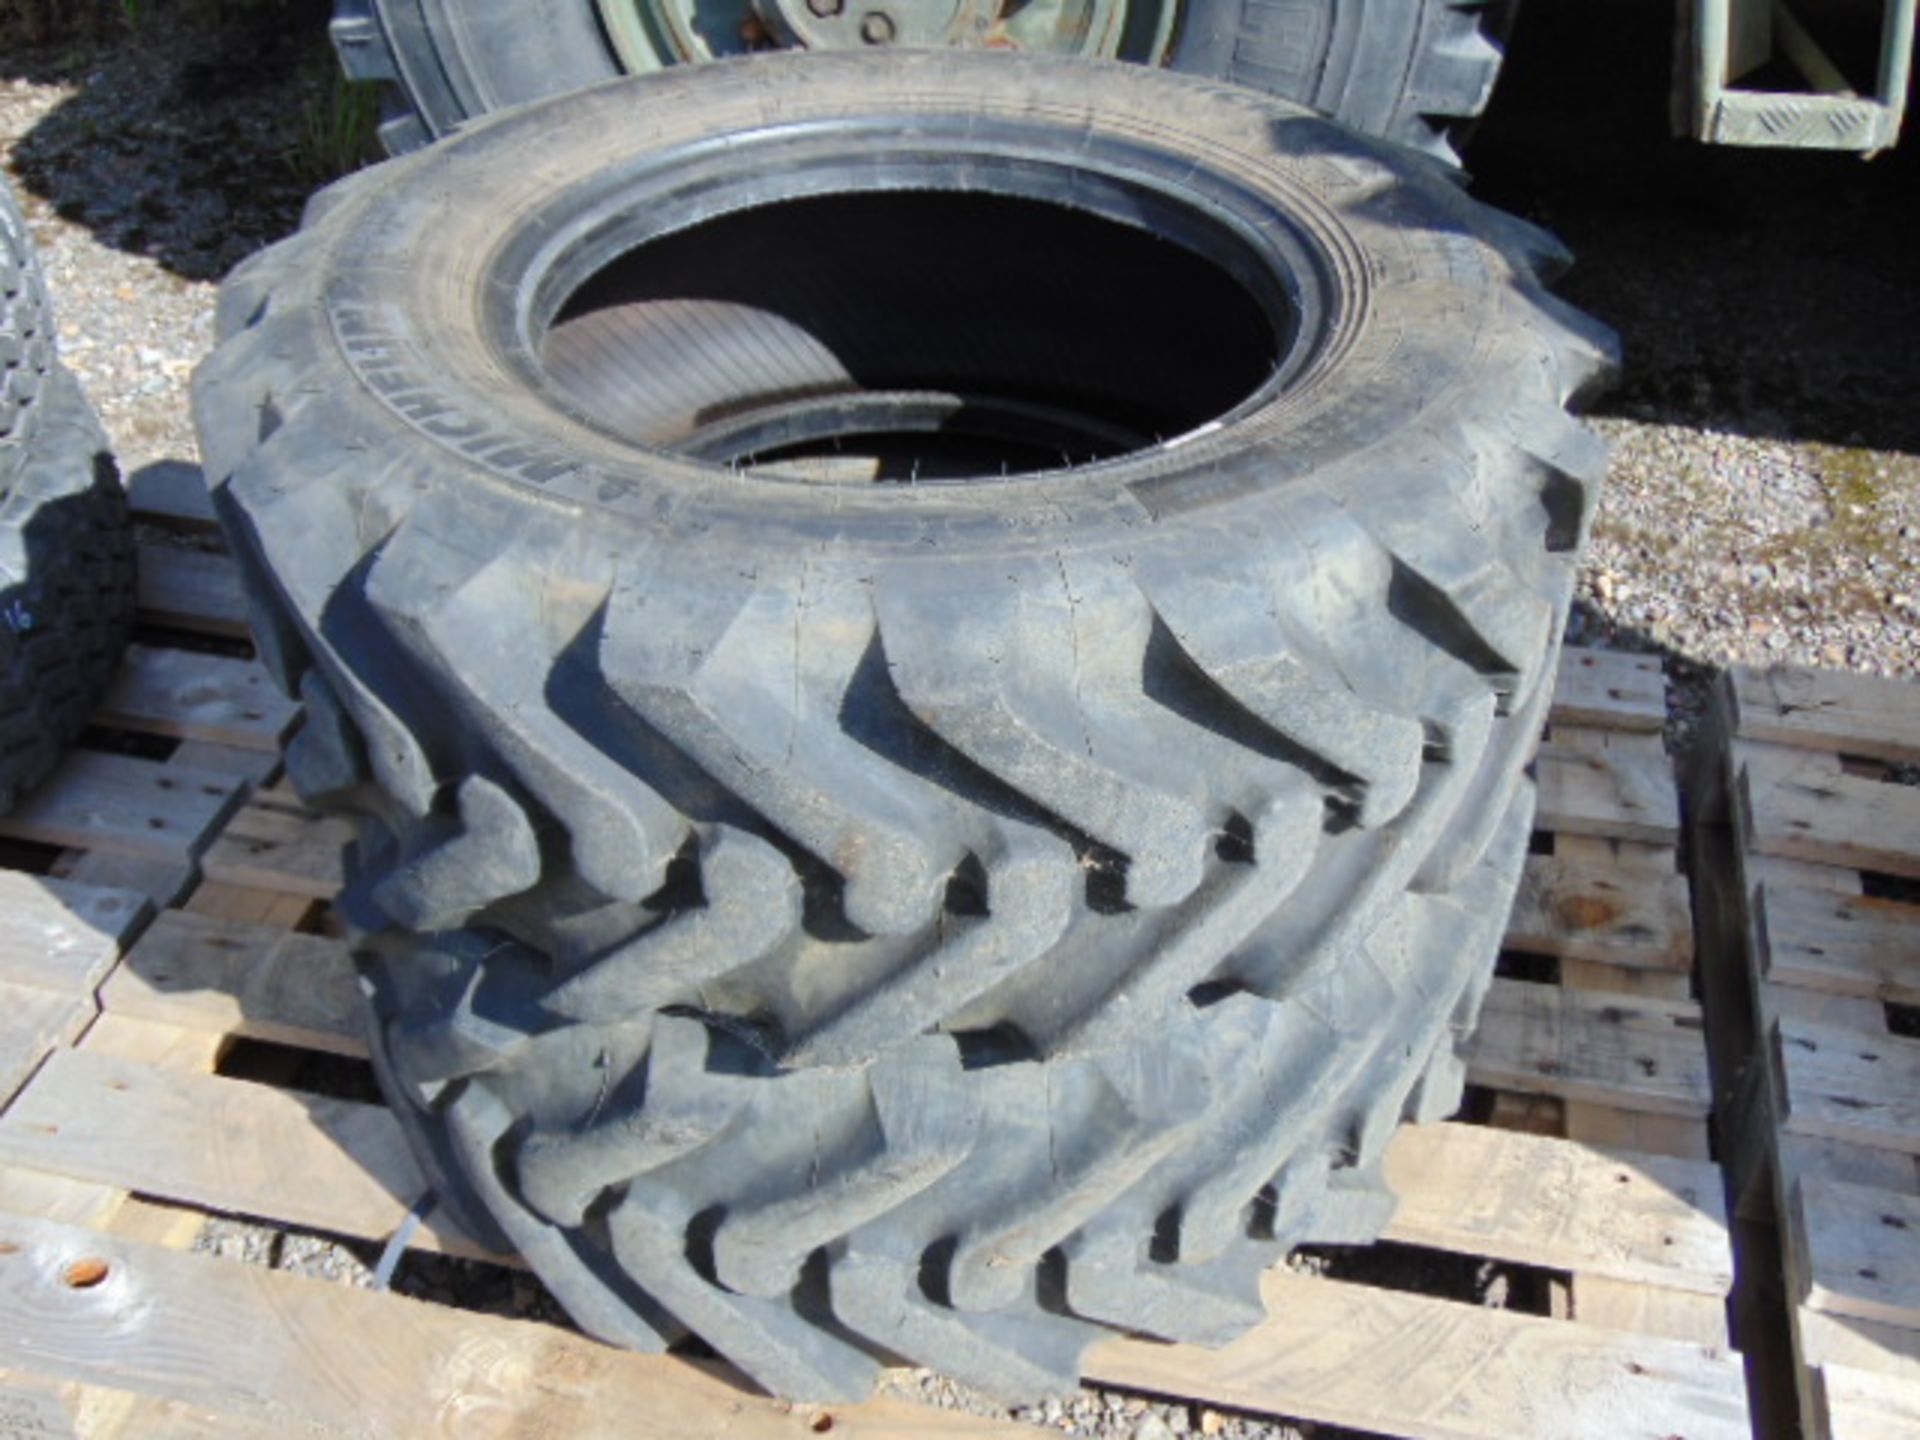 2 x Michelin Power CL 280/80-18 IND Tyres